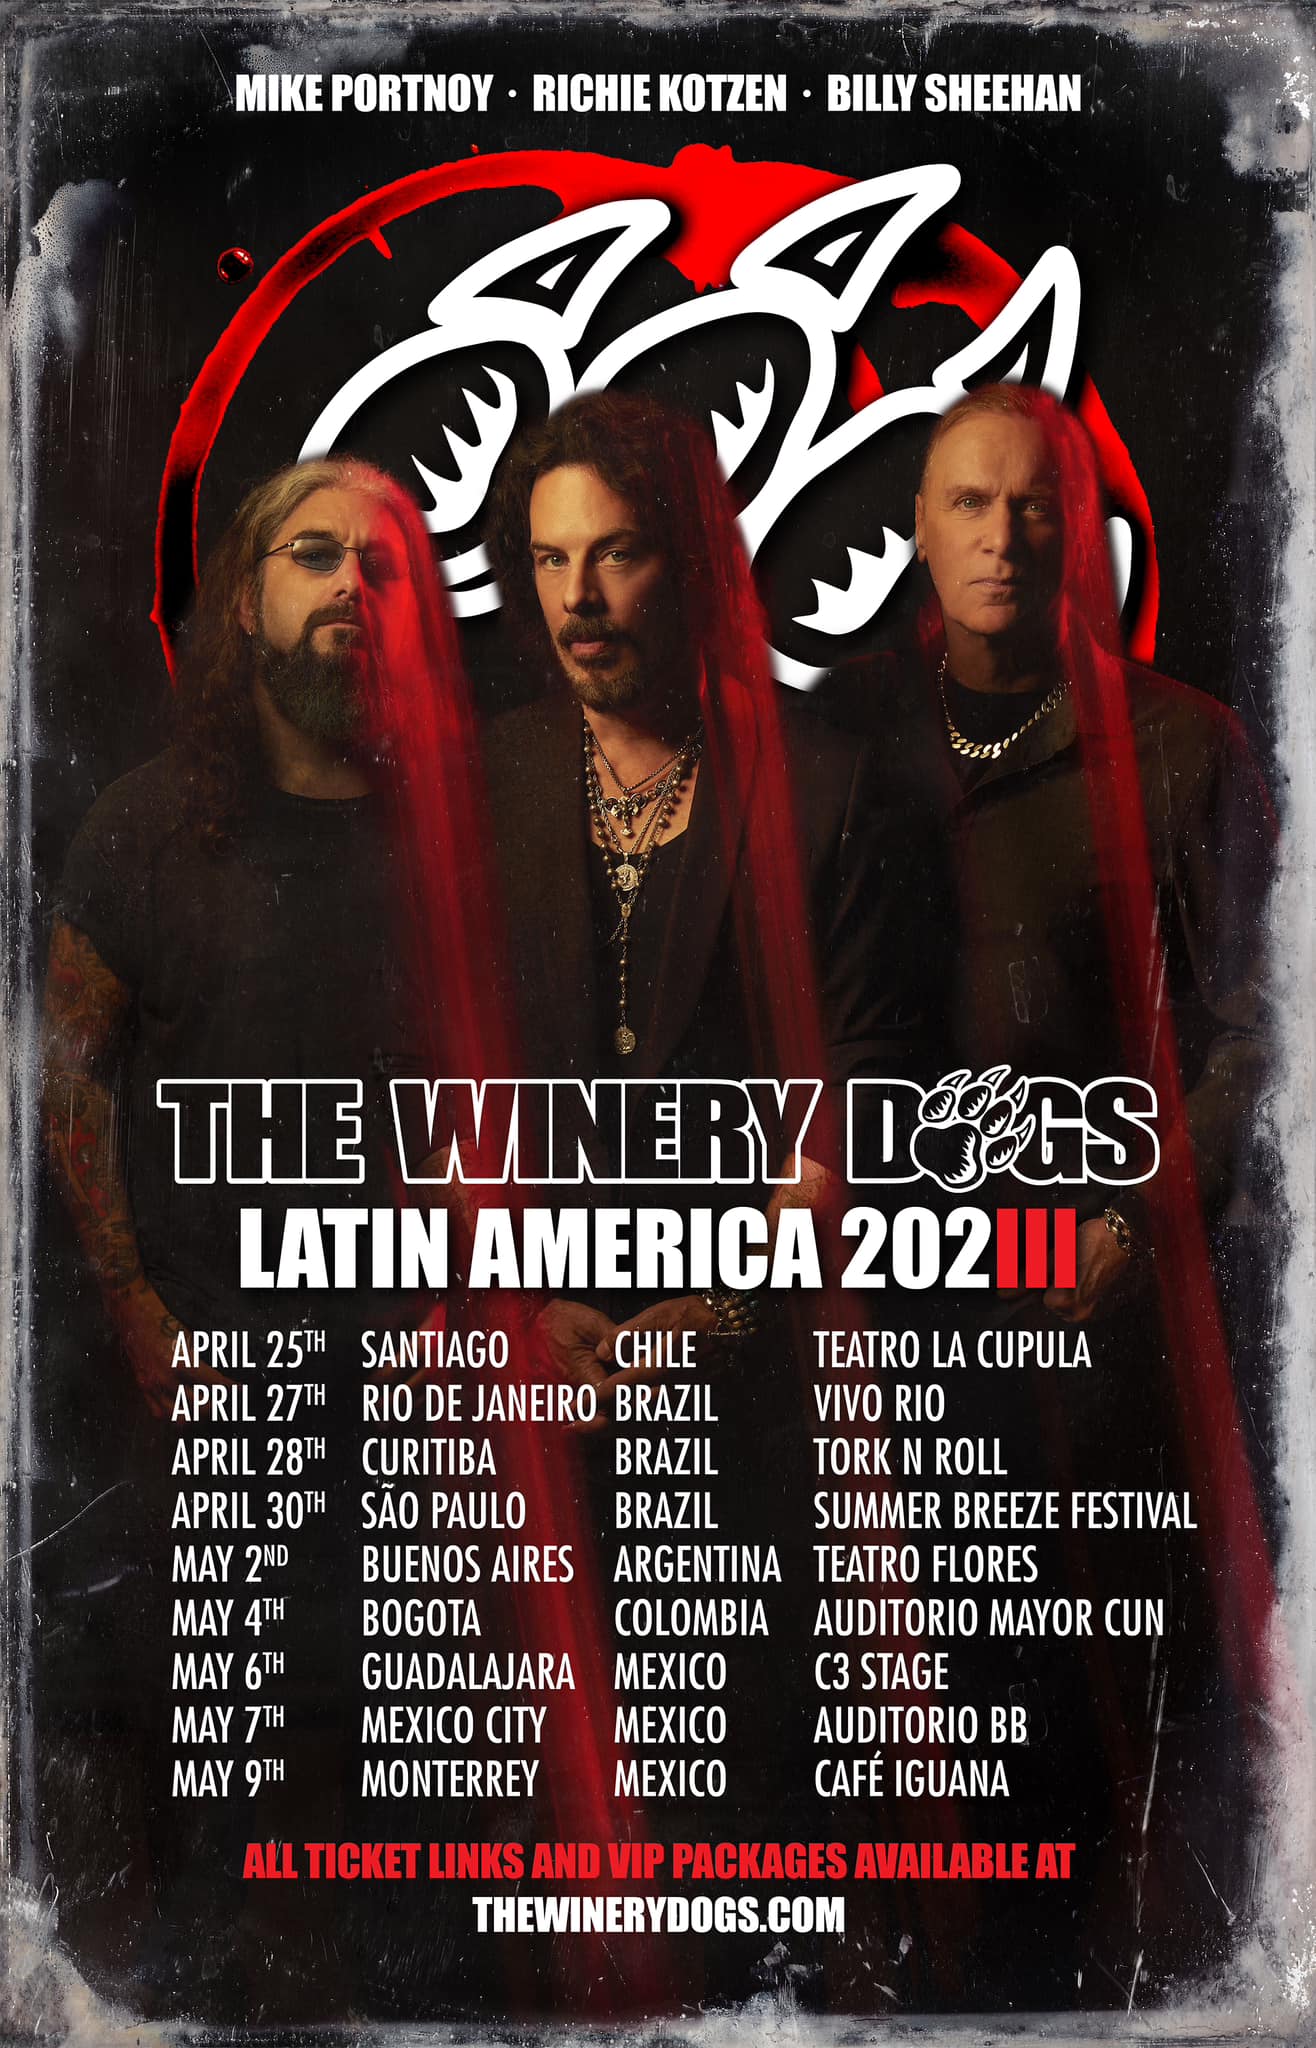 The Winery Dogs Latin America 2023 